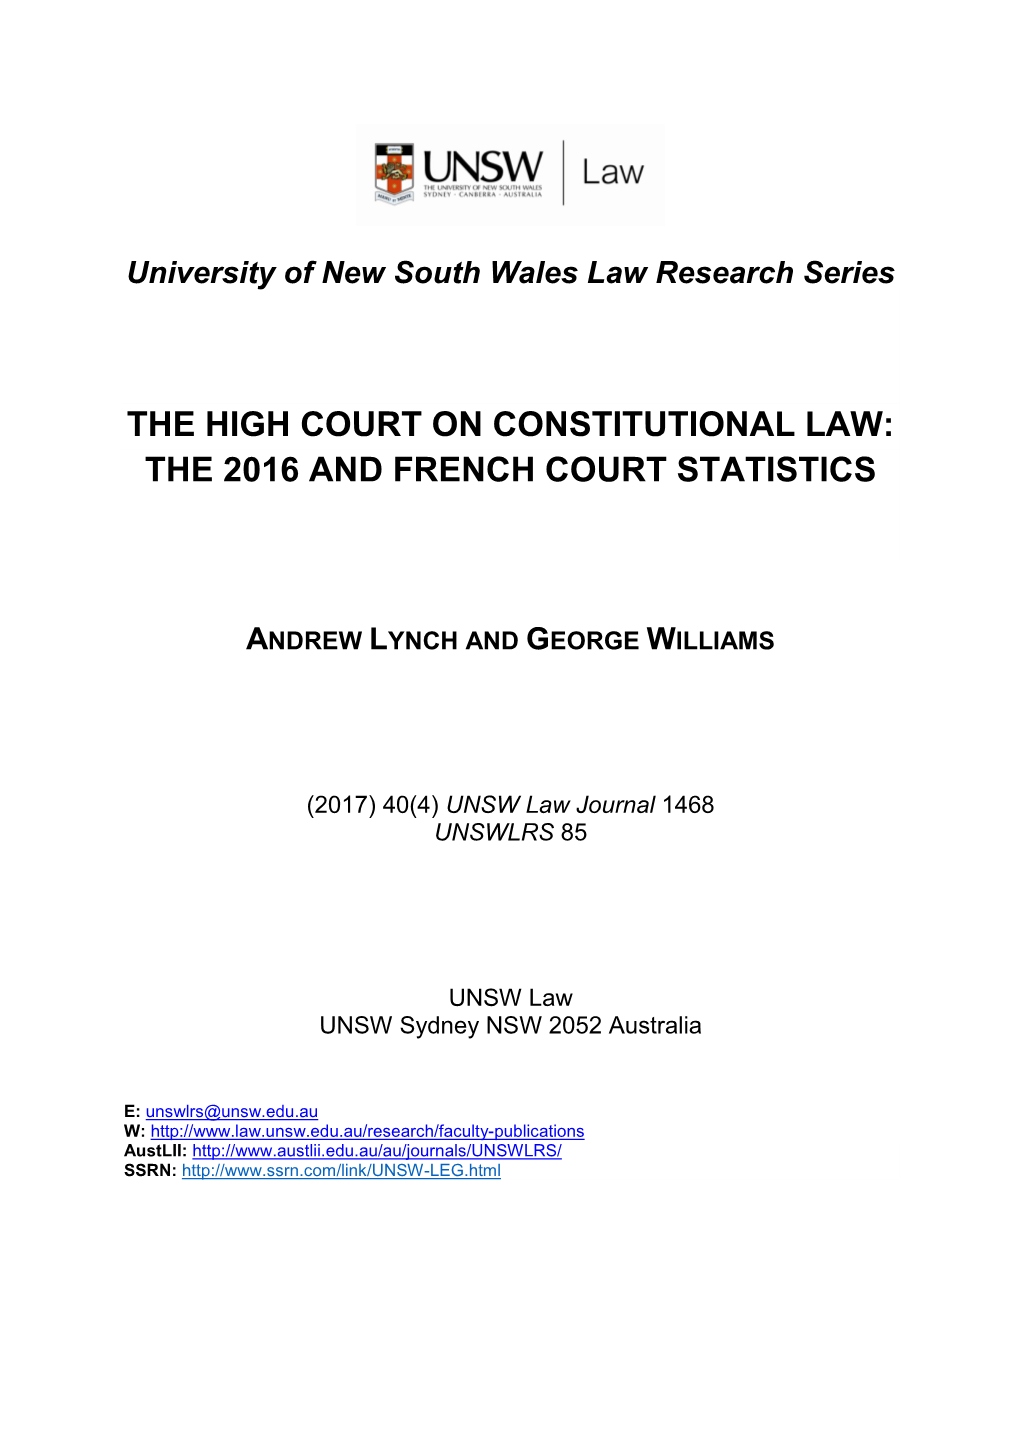 The High Court on Constitutional Law: the 2016 and French Court Statistics